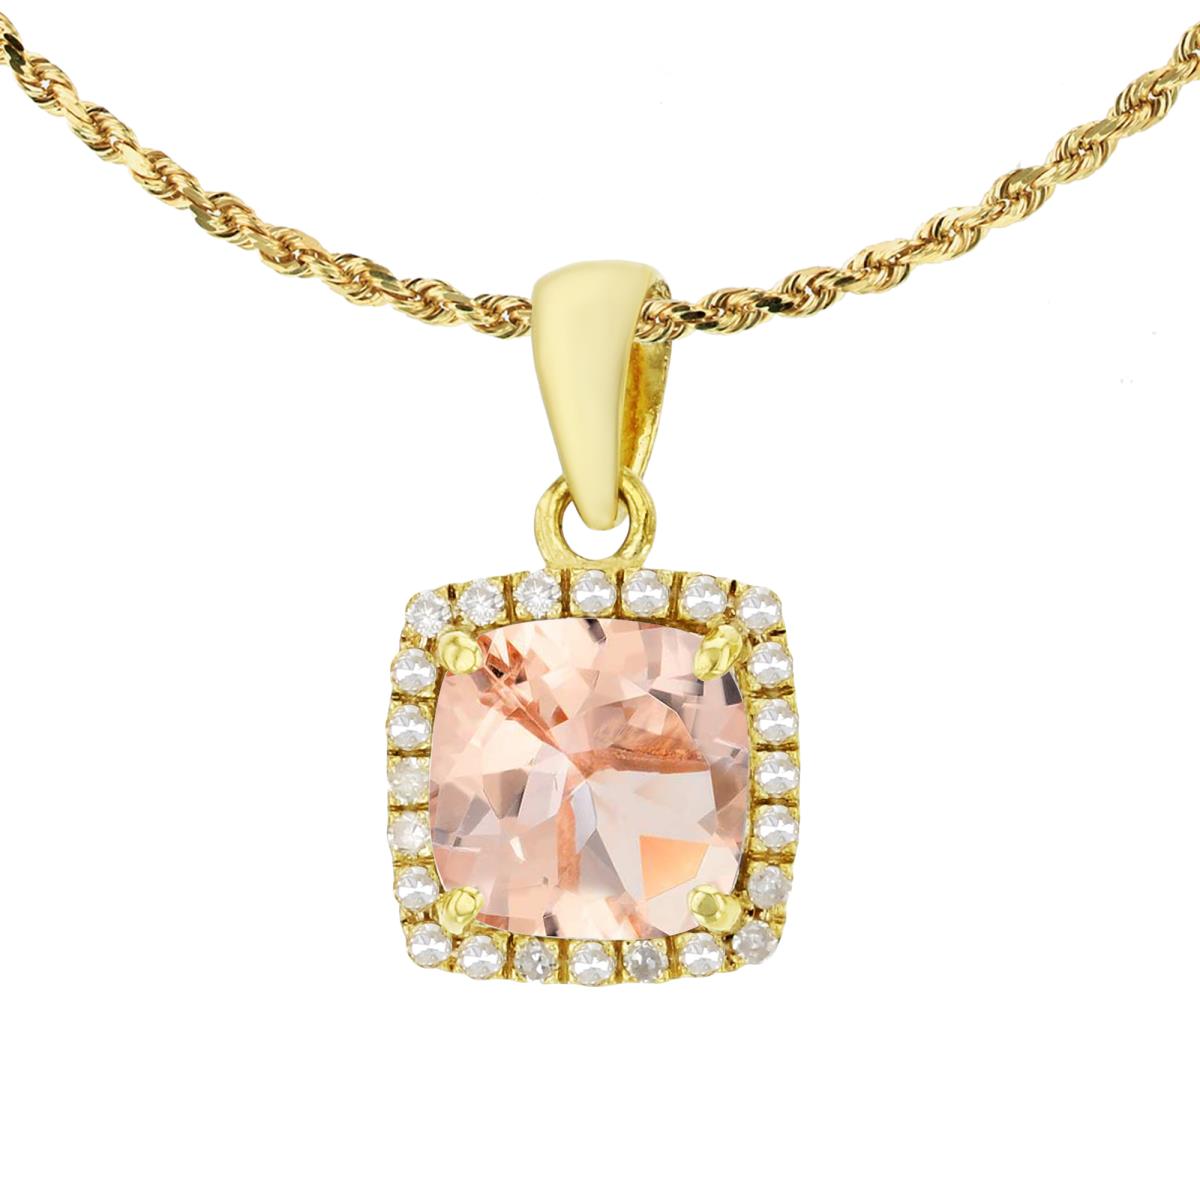 14K Yellow Gold 7mm Cushion Morganite & 0.12 CTTW Diamond Halo 18" Rope Chain Necklace